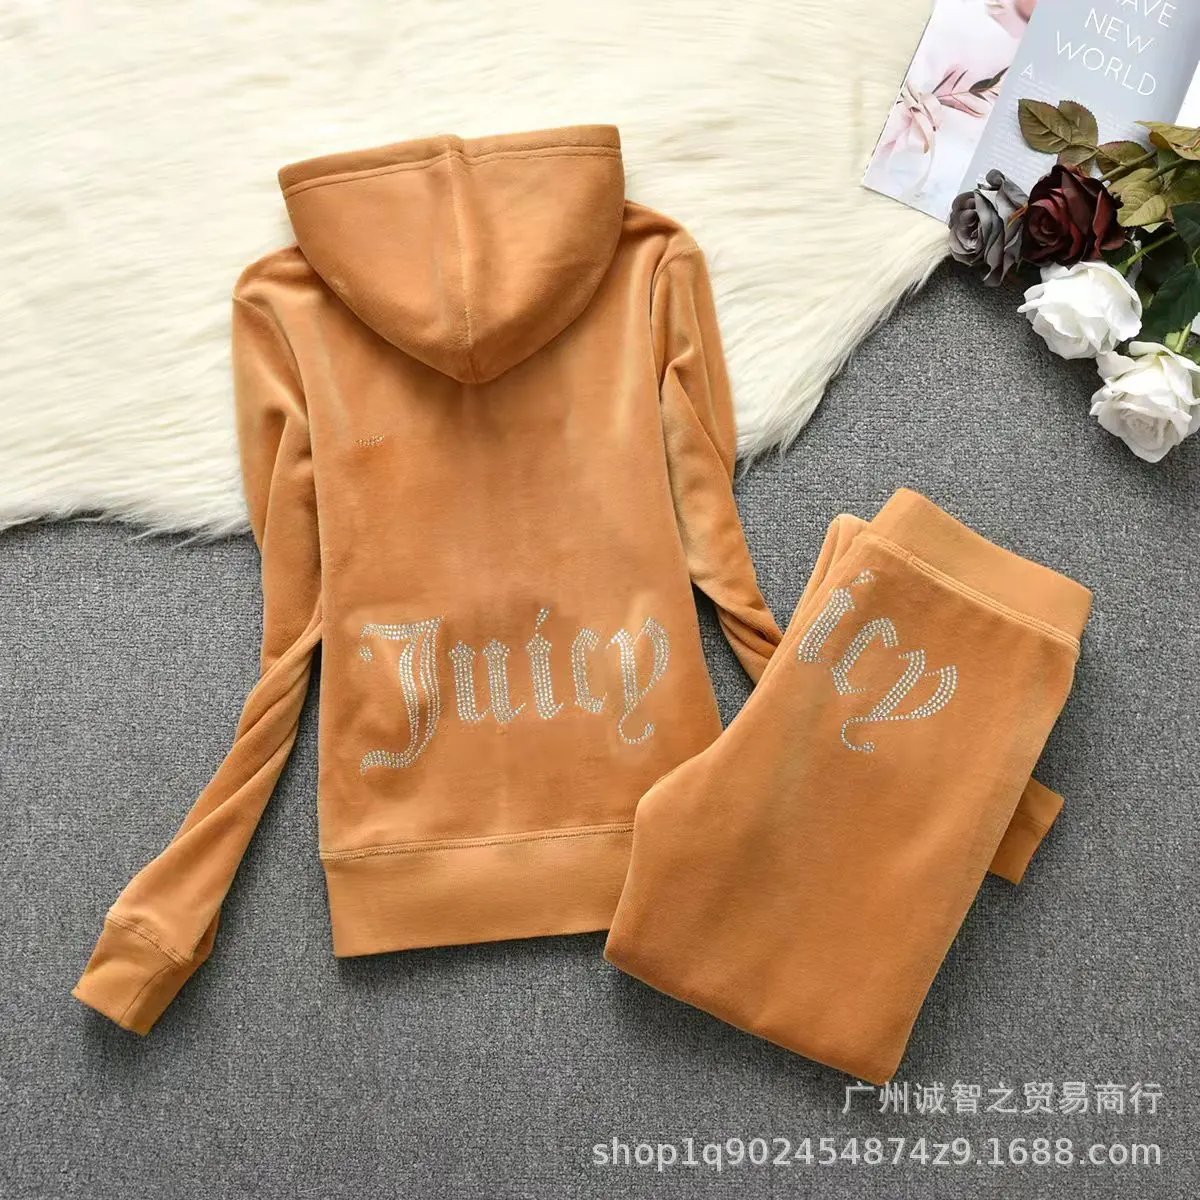 Spring/Fall 2021 Women's  Velvet Fabric Tracksuits Velour Suit Women Tracksuit Hoodies And Pants Fat Sister Sportswear